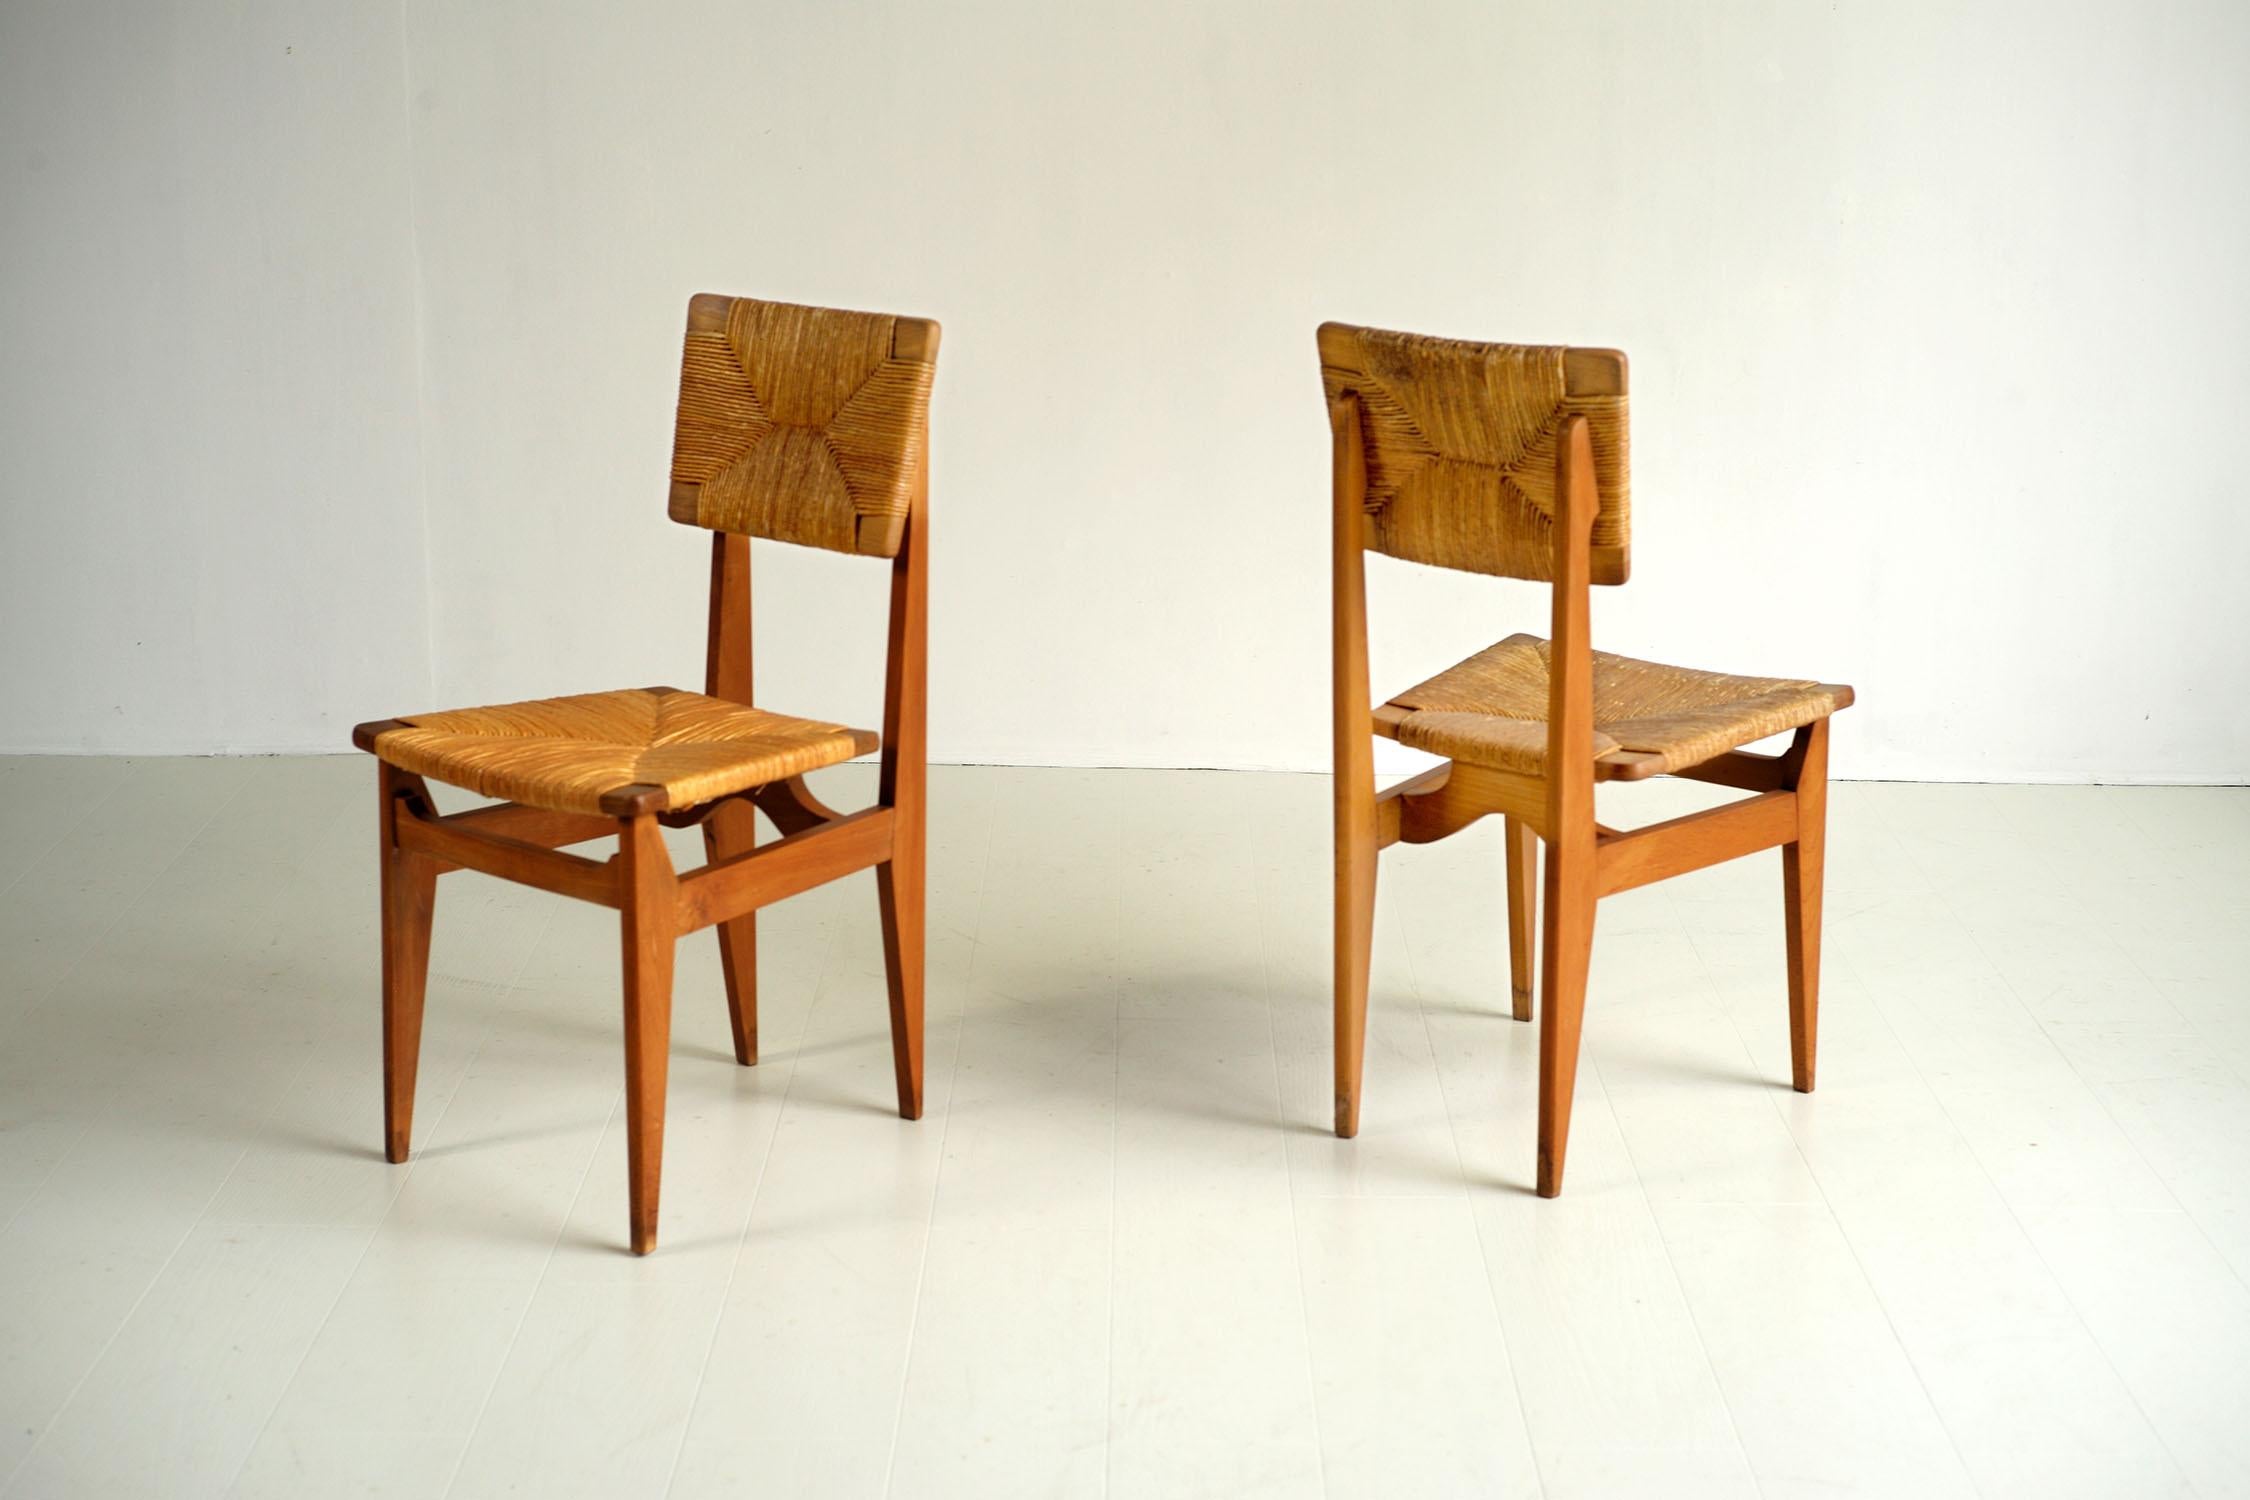 Marcel Gascoin, Pair of beech straw chairs, 